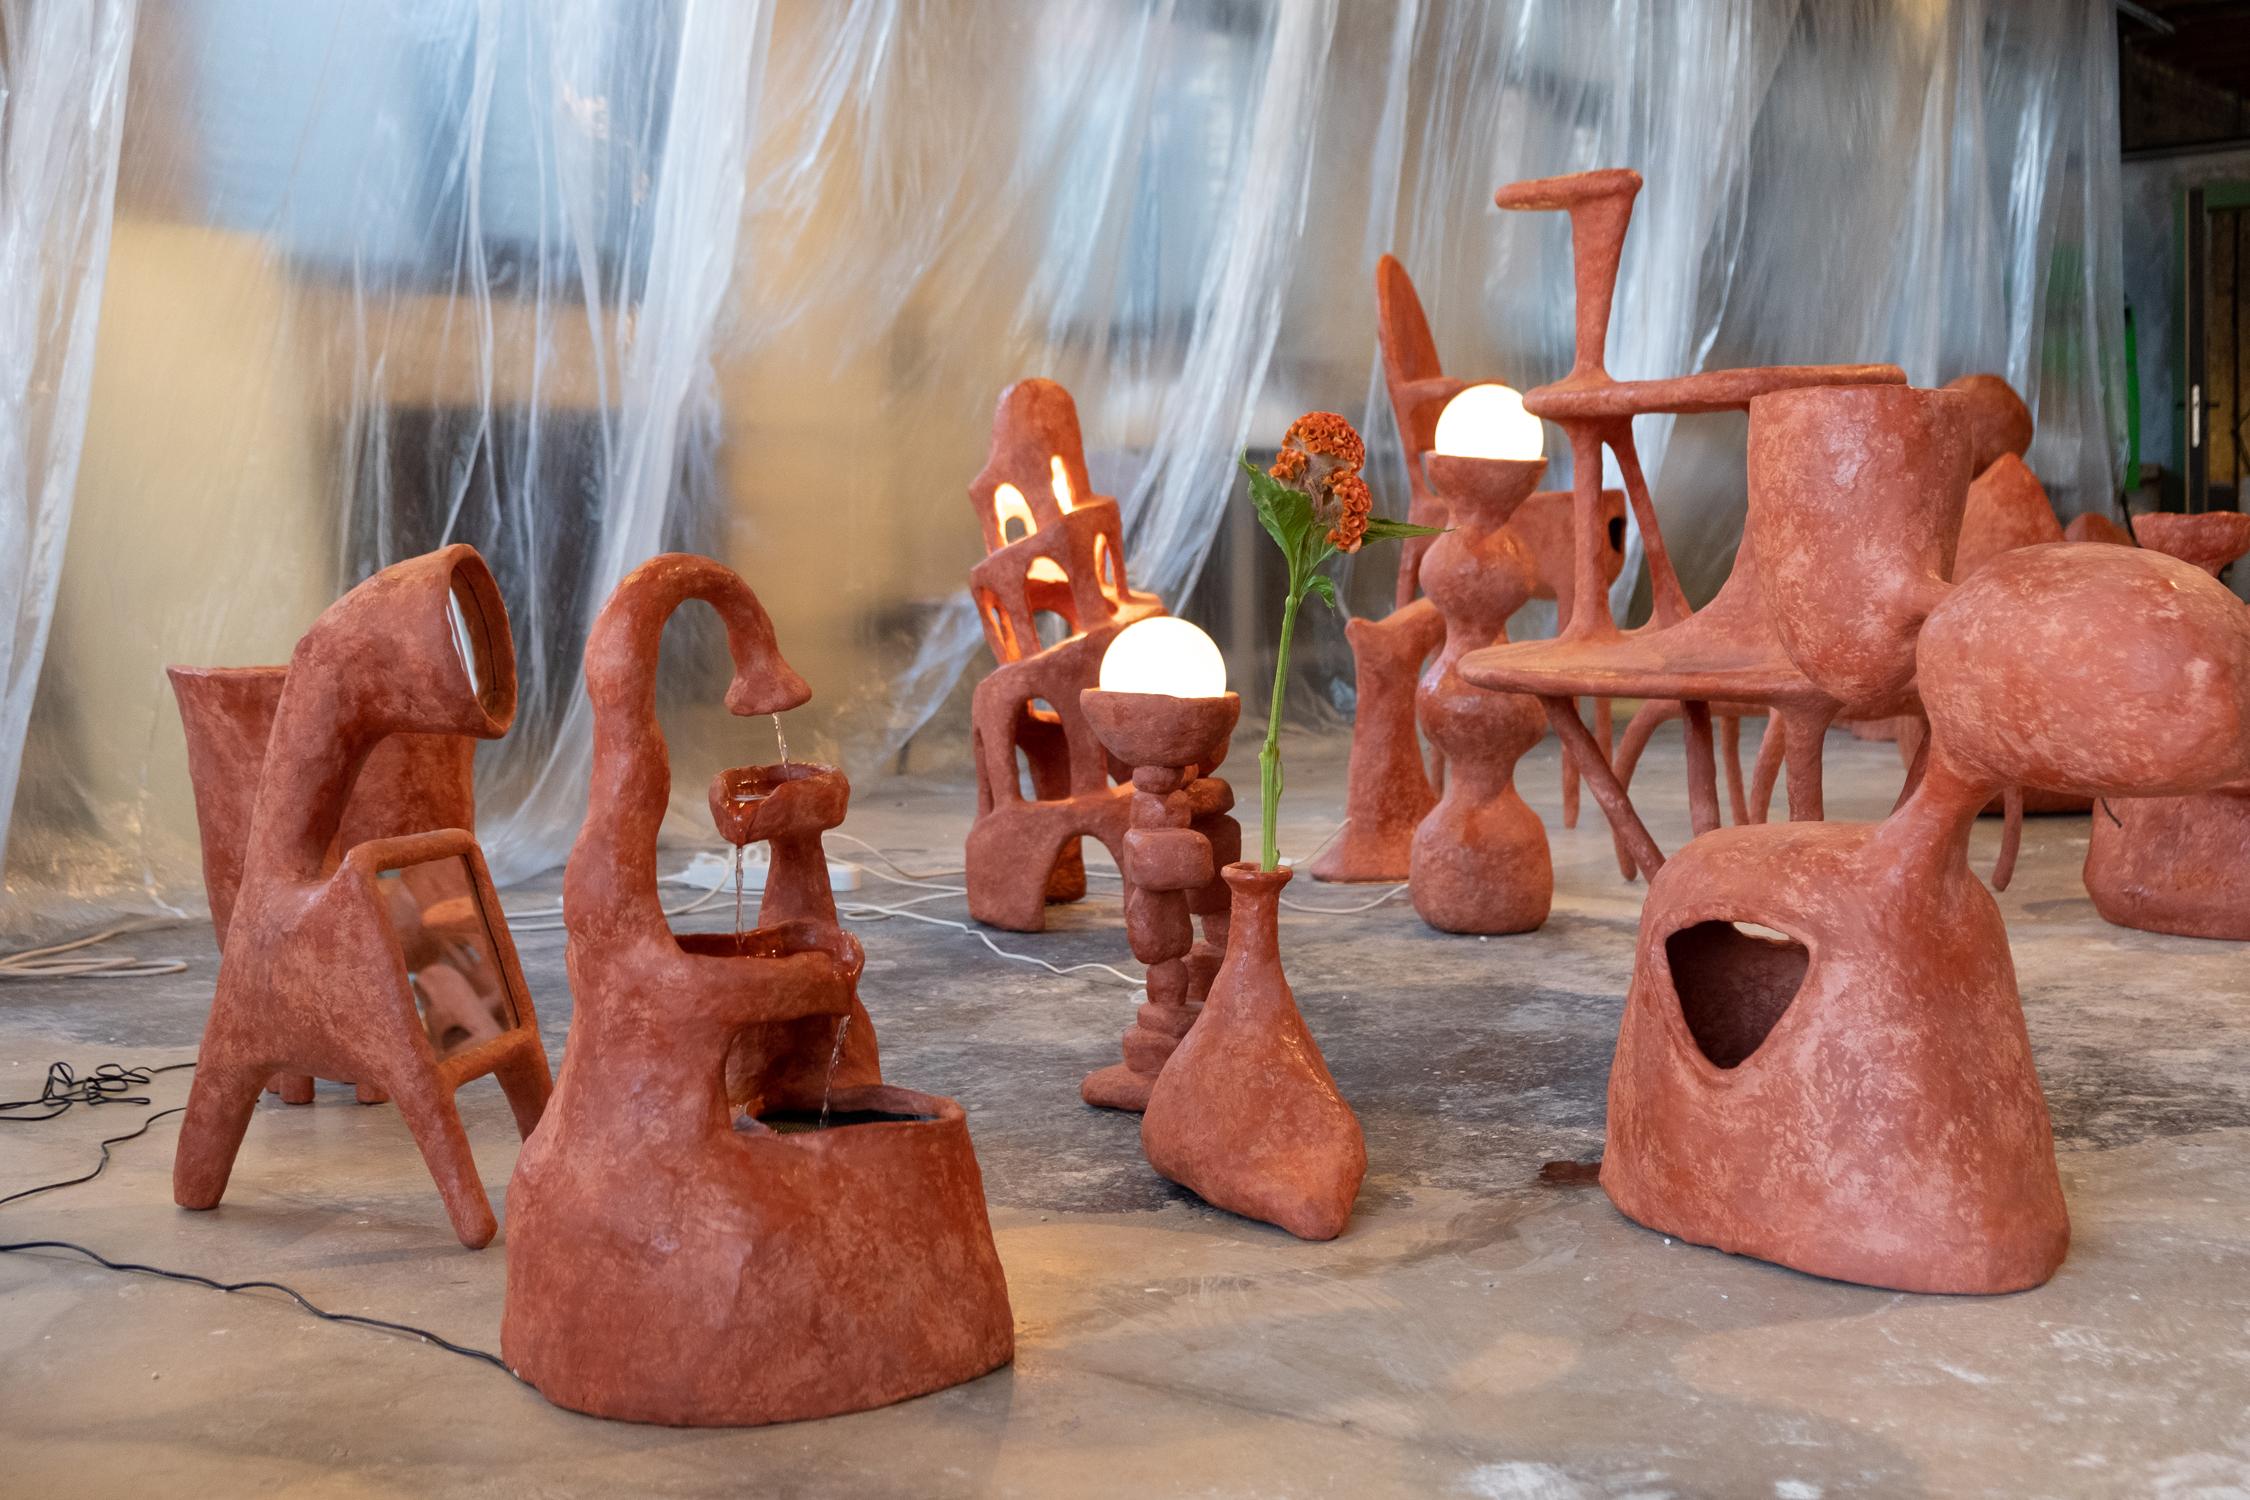 Clay Cotta Shelter Shelves by Decio Studio made at alfa.brussels for Everyday Gallery